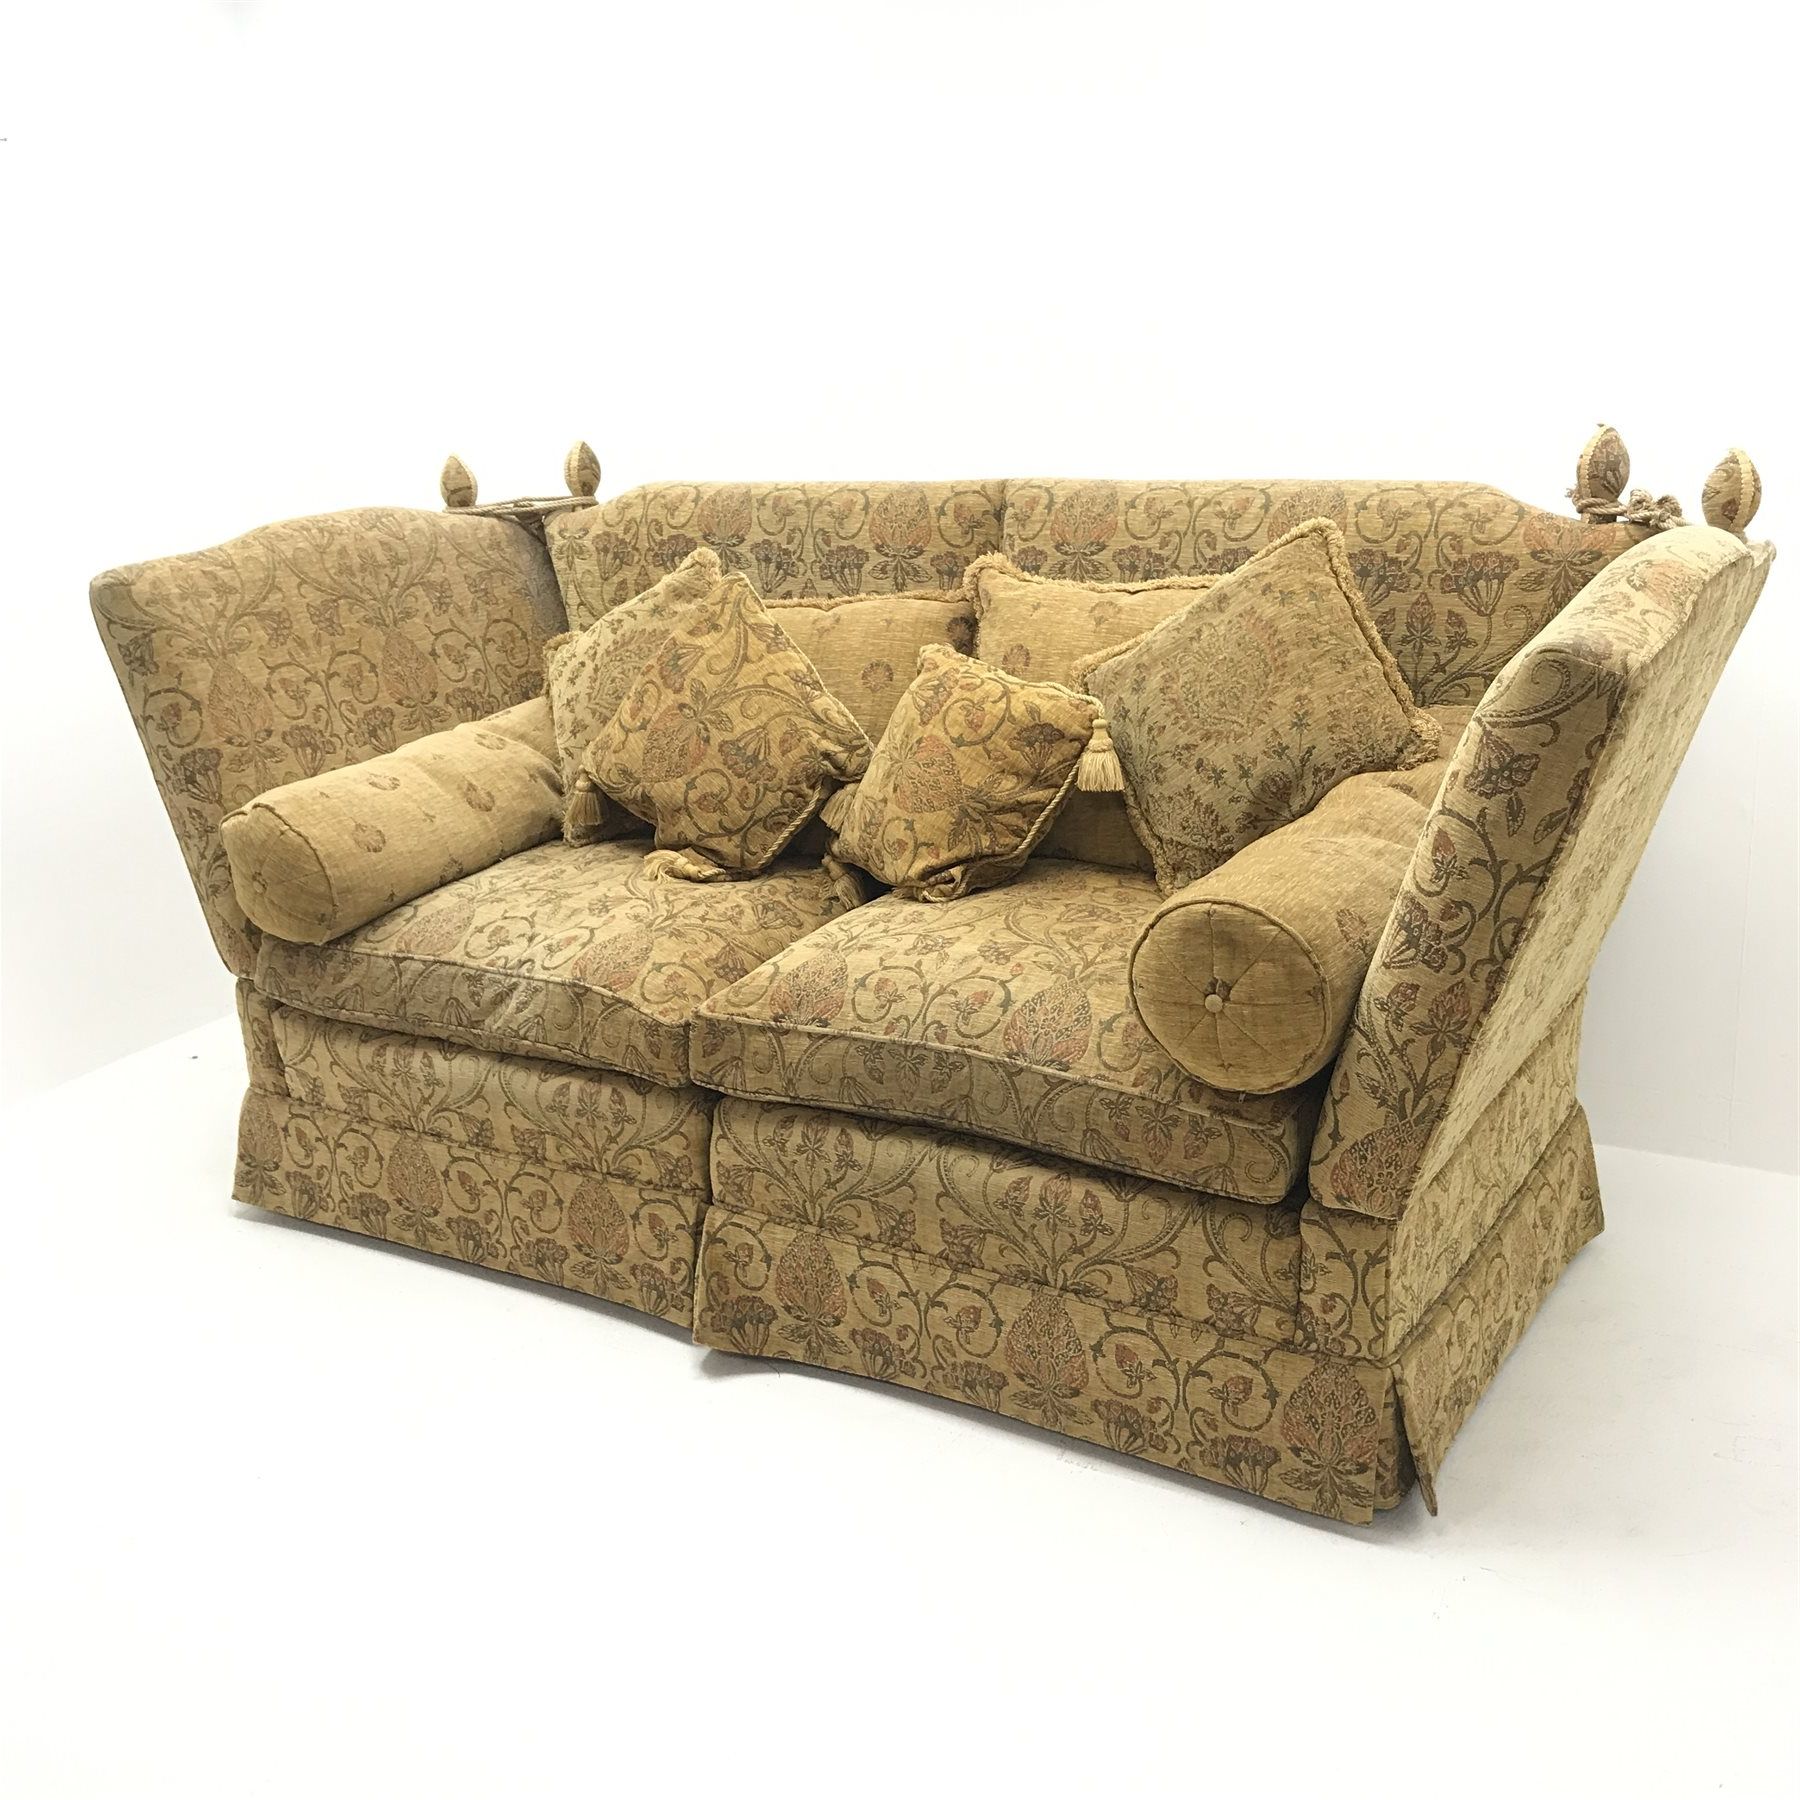 Knowle Style Two Seat Sofa, Upholstered In Traditional Floral Patterned Within Preferred Sofas In Pattern (View 7 of 15)